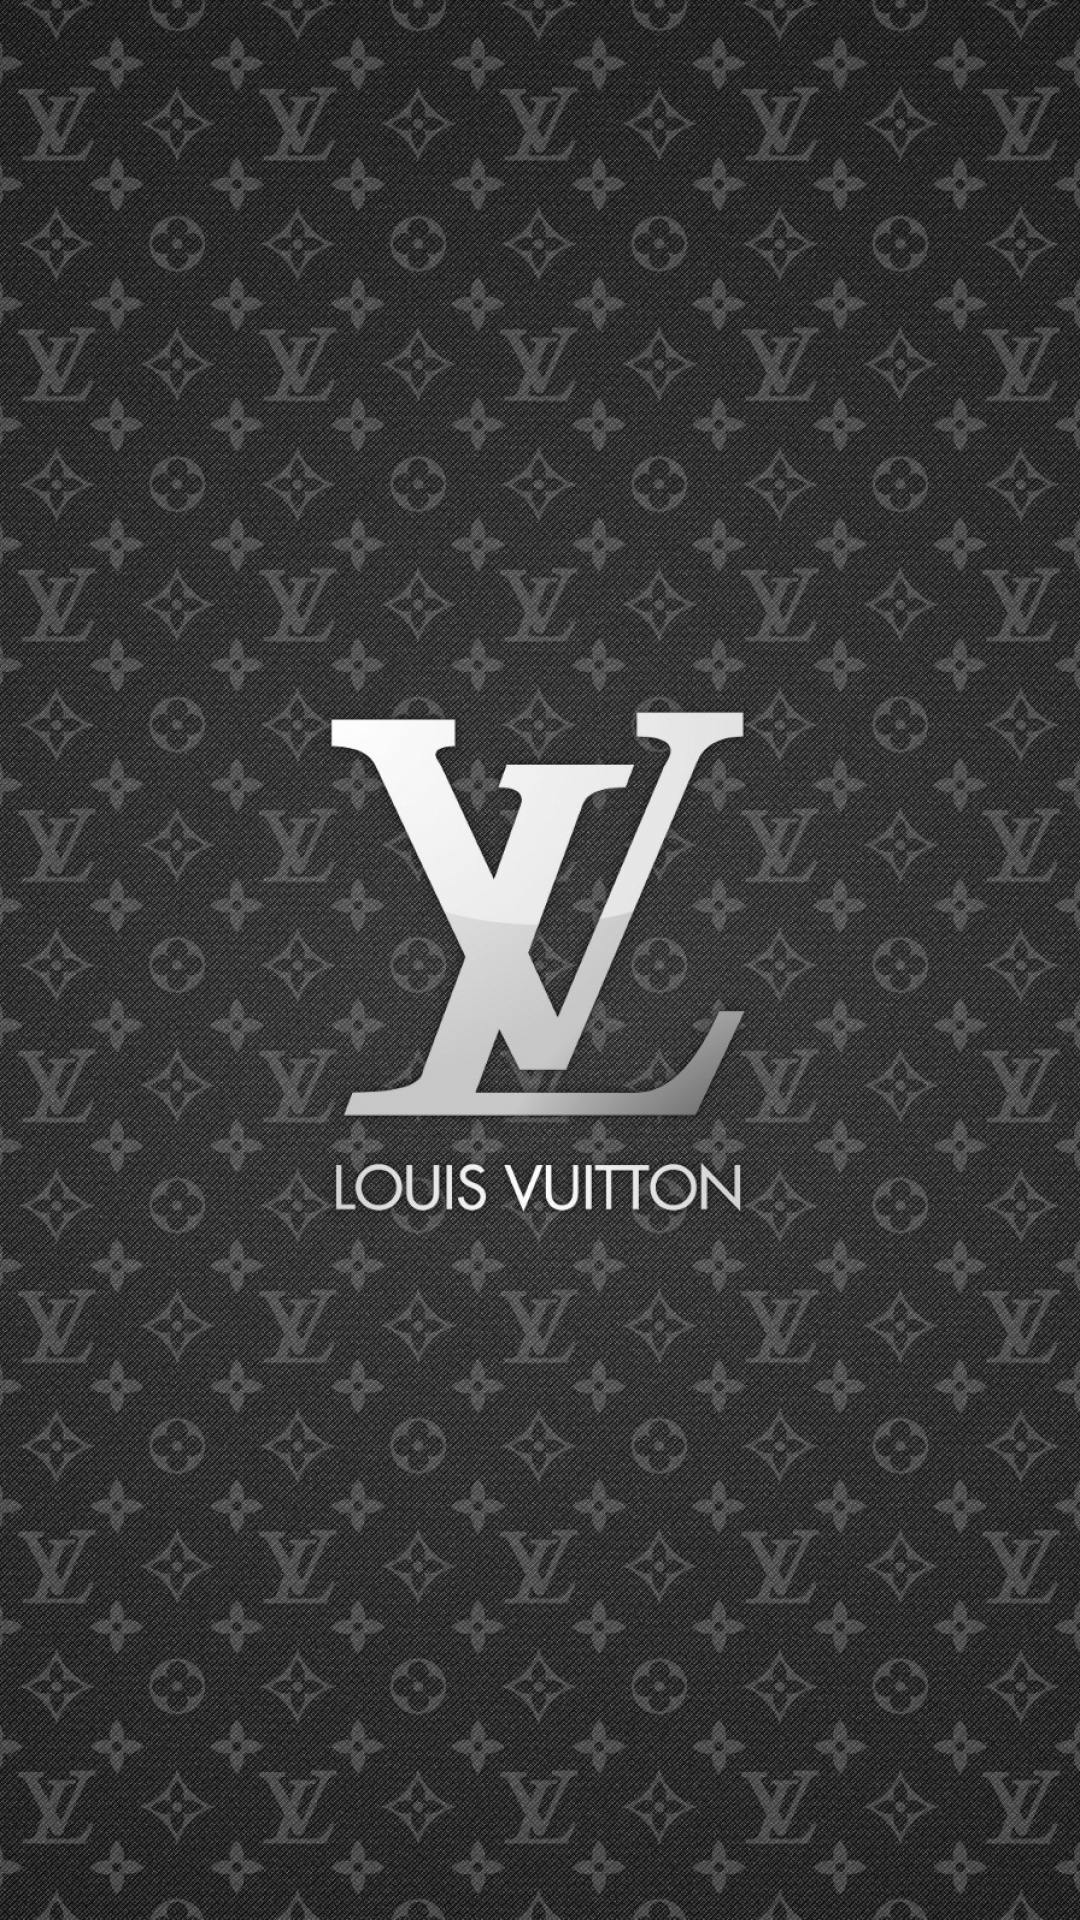 Products/Louis Vuitton (1080x1920) Wallpaper ID: 13150 - Mobile Abyss